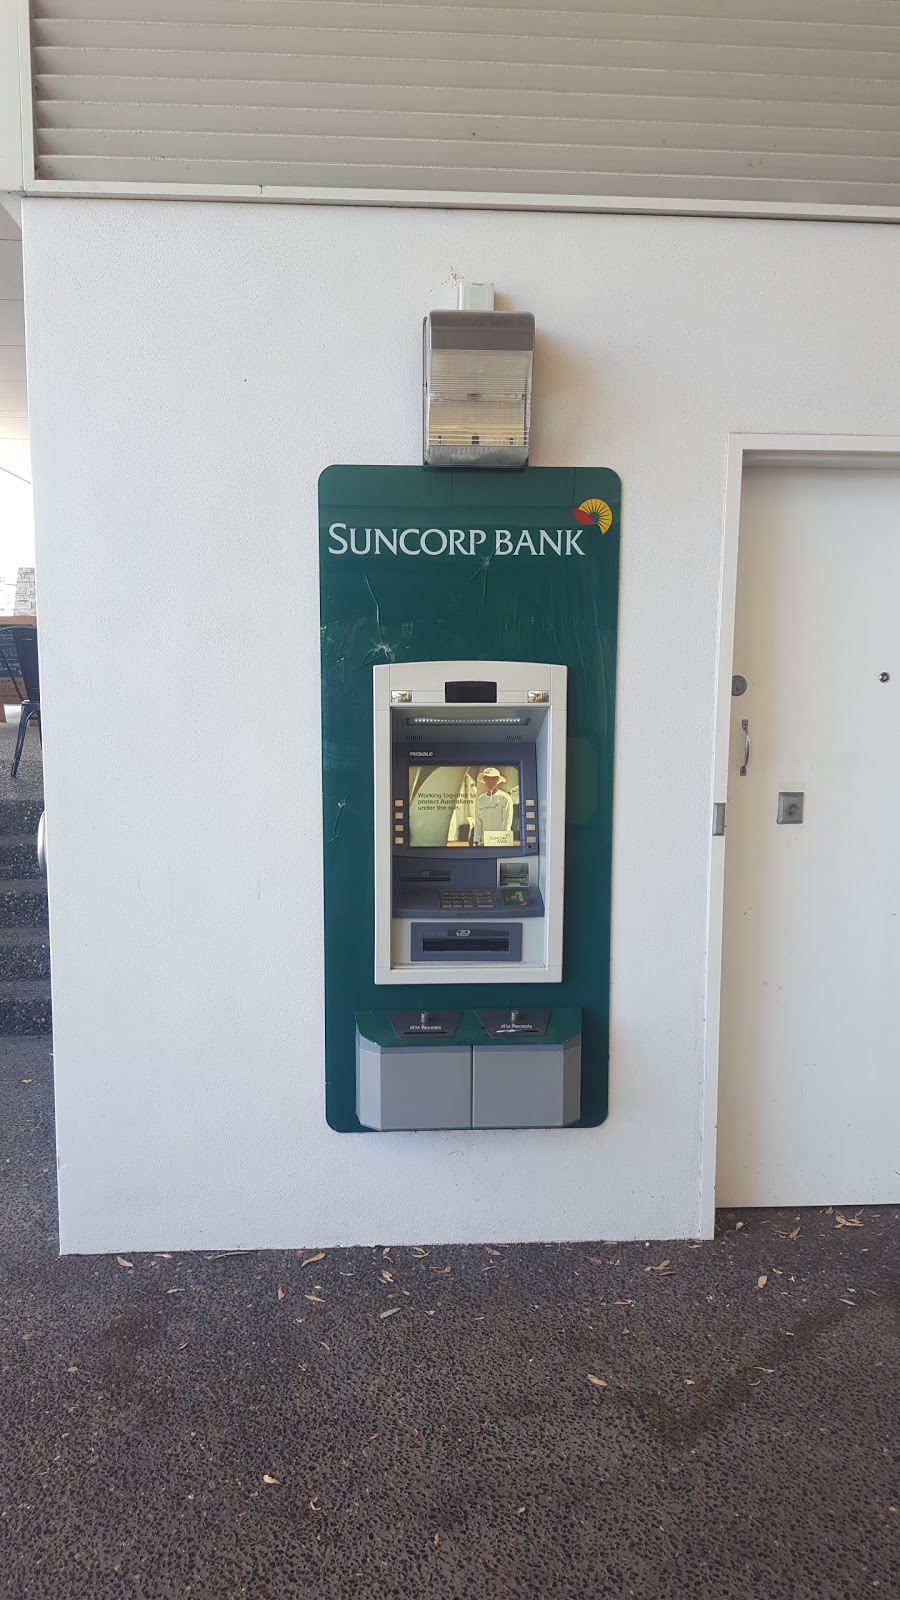 Suncorp Bank ATM | bank | 696 New Cleveland Rd, Wakerley QLD 4154, Australia | 131155 OR +61 131155